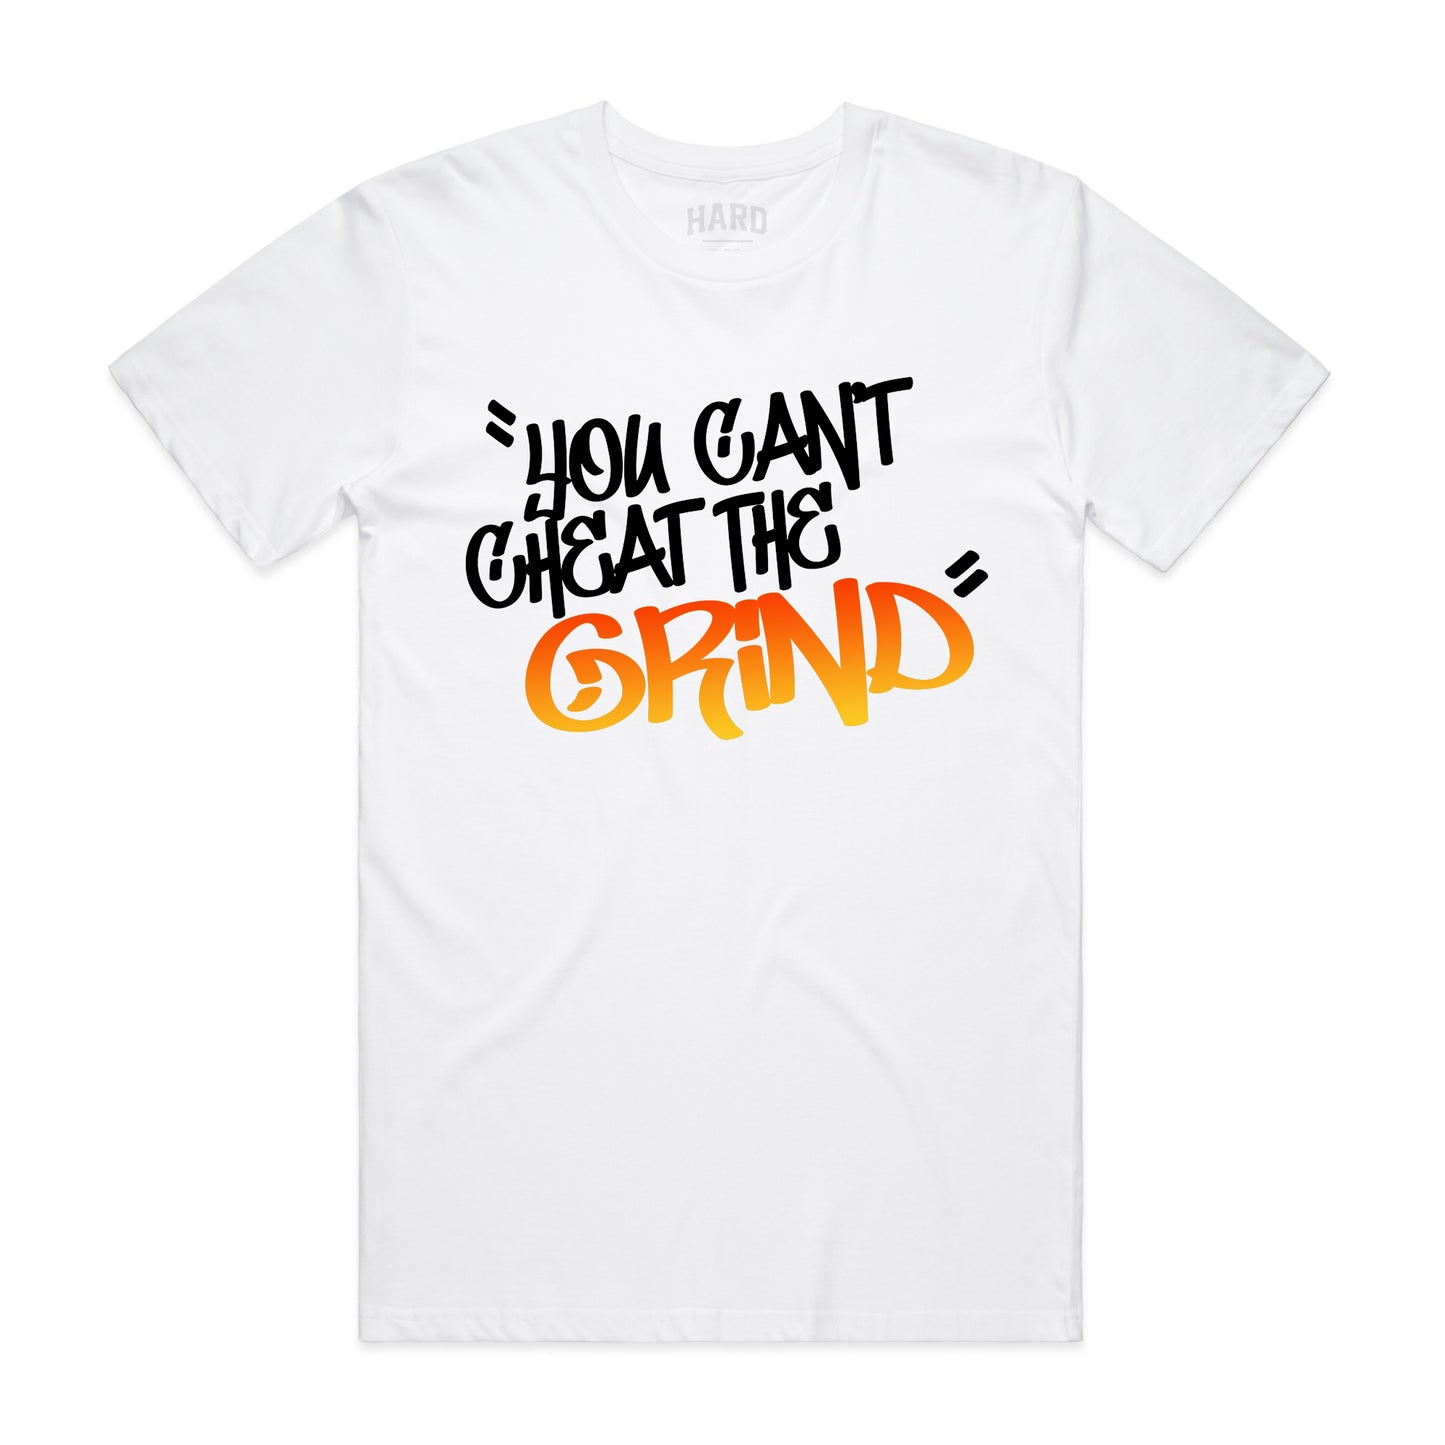 Can't Cheat The Grind Tee White